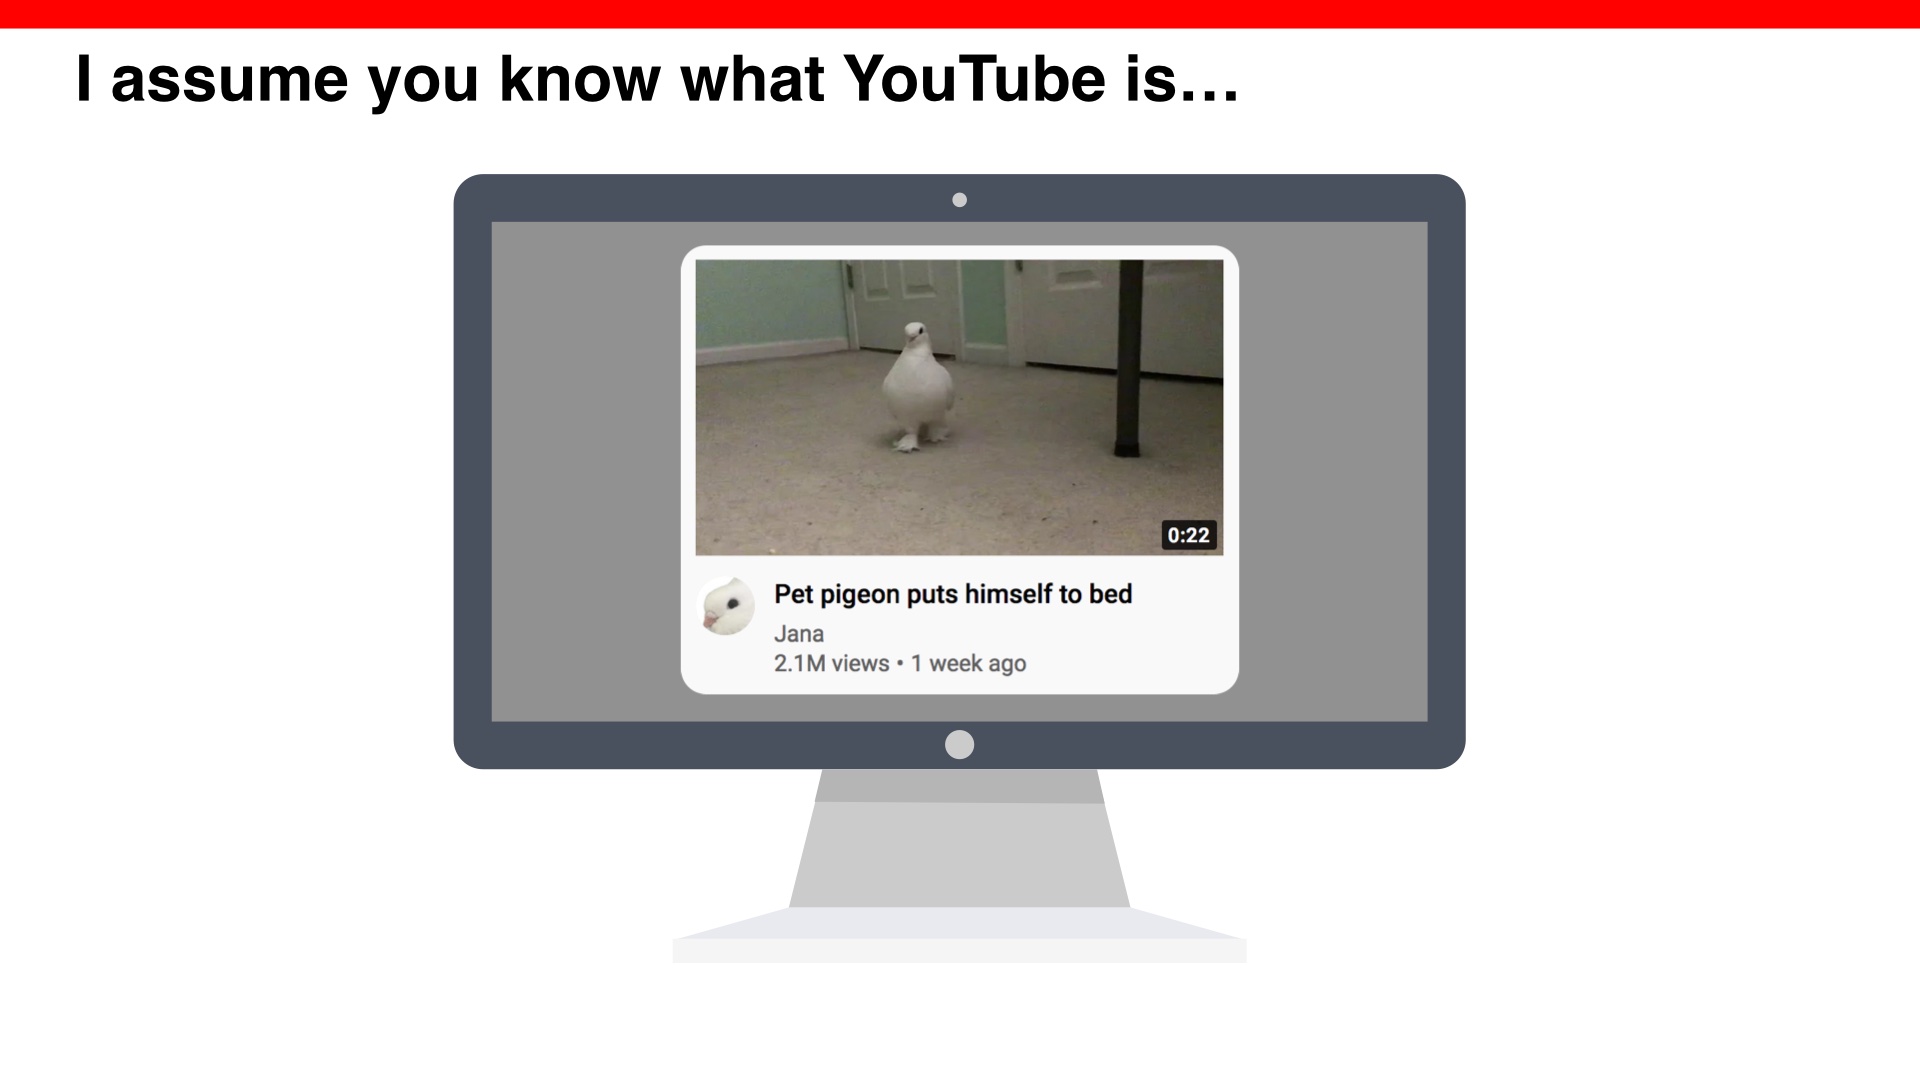 I assume you know what YouTube is, image of a video called 'pet Pigeon puts himseld to bed' which has gotten 2.1 million views 